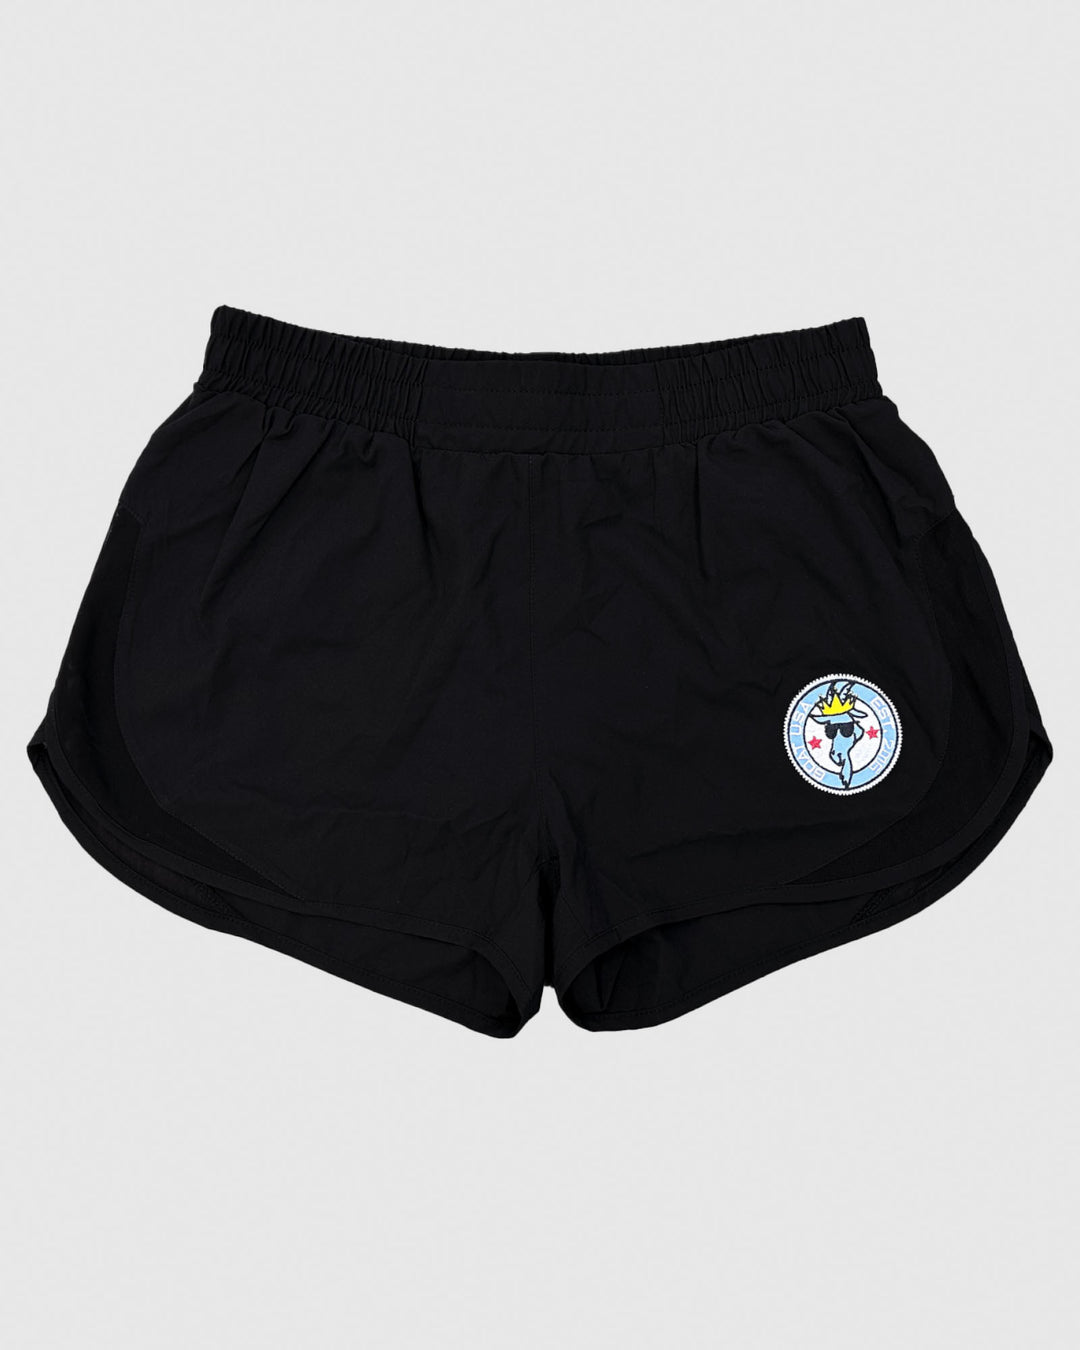 Black women's athletic shorts with goat patch